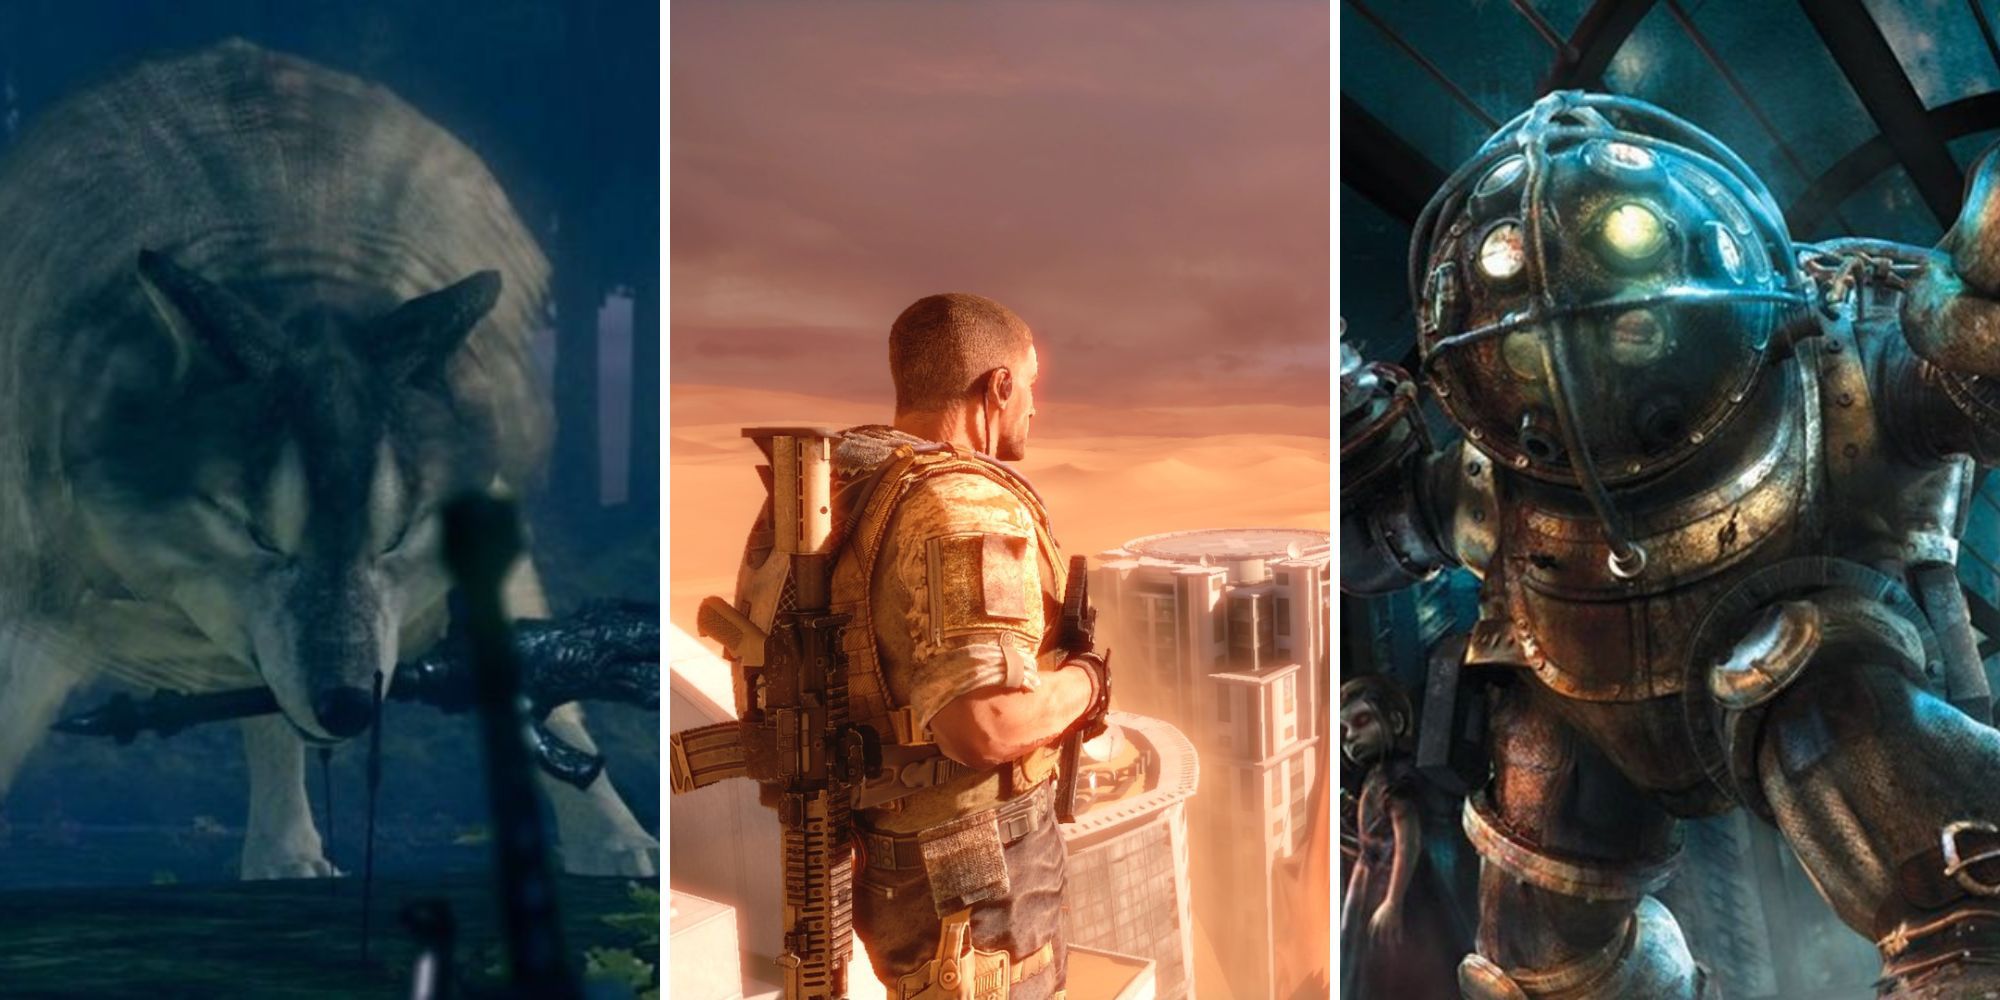 A grid of images showing the three games Dark Souls, Special Ops: The Line, and Bioshock